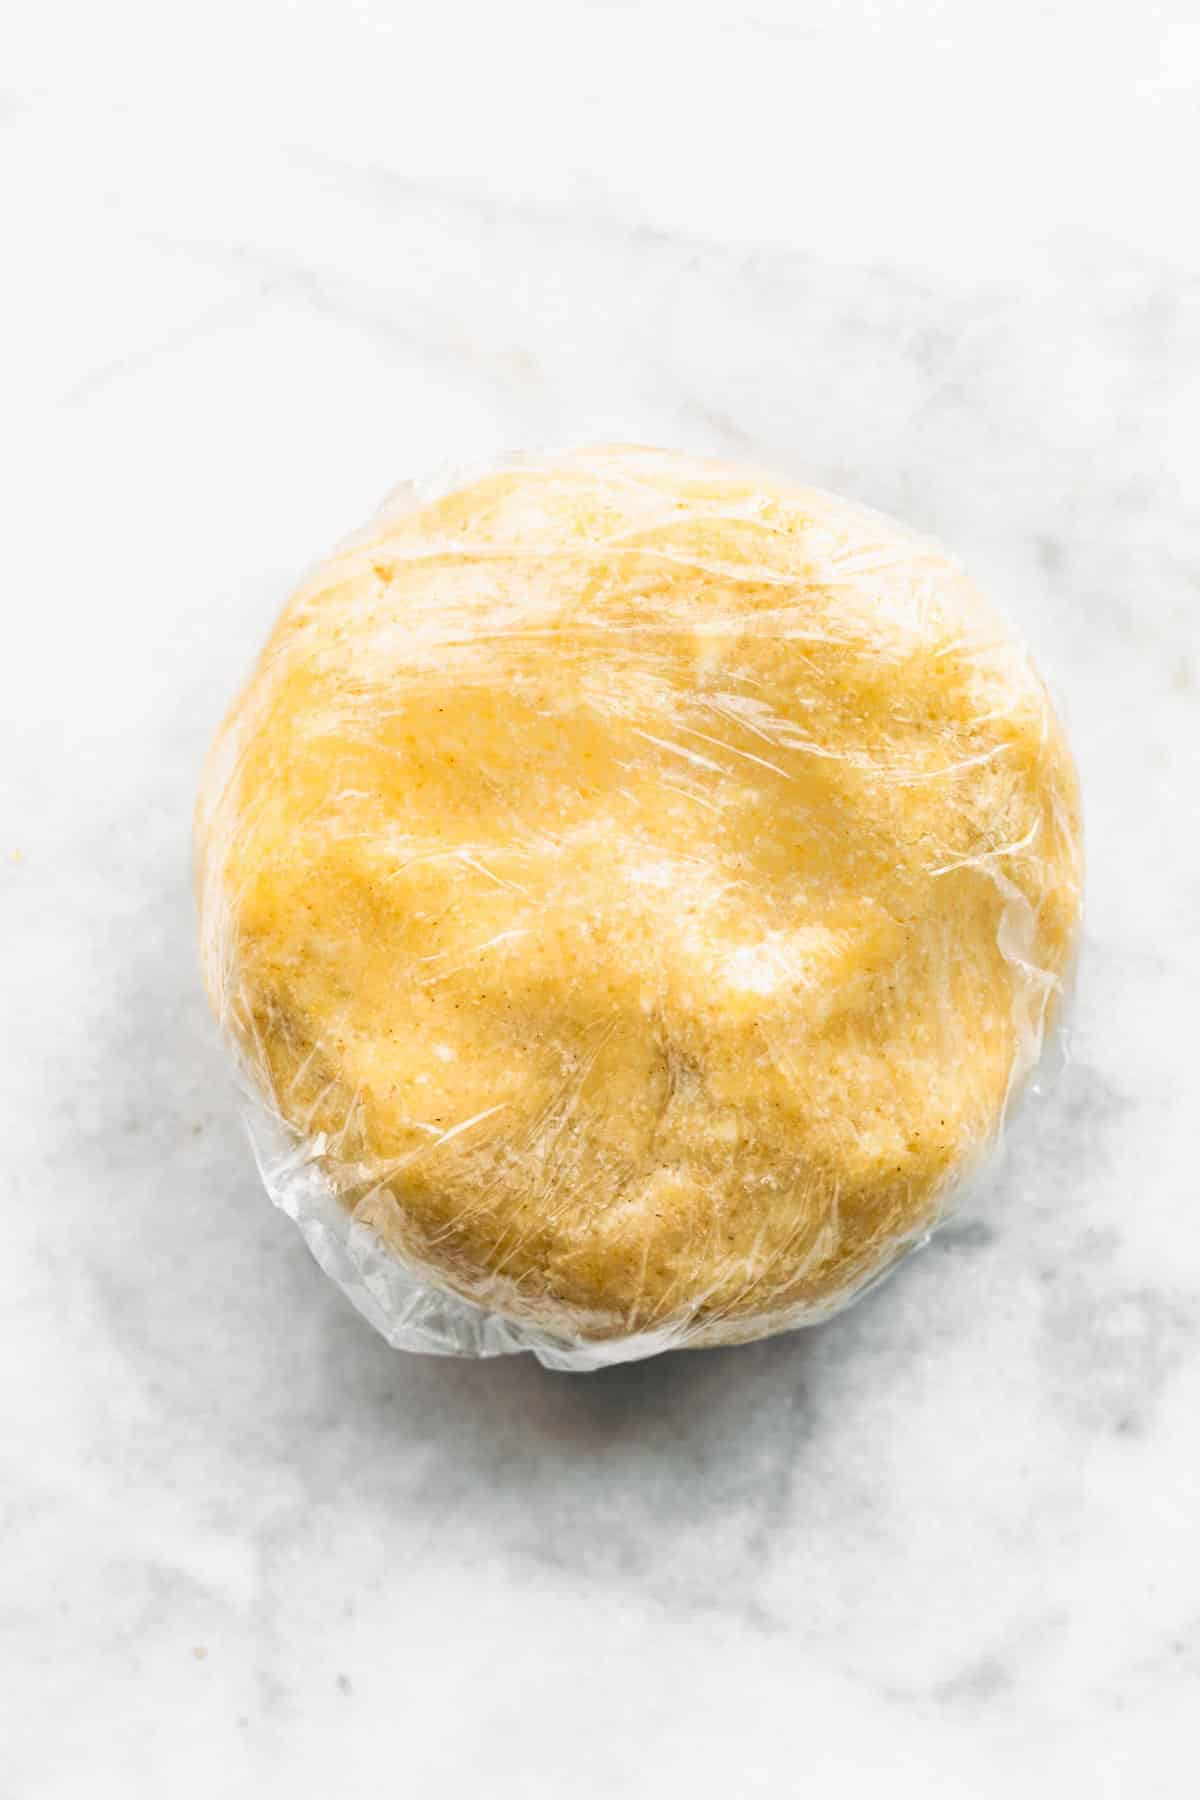 A gluten free pie dough puck wrapped in plastic wrap on a marble countertop.